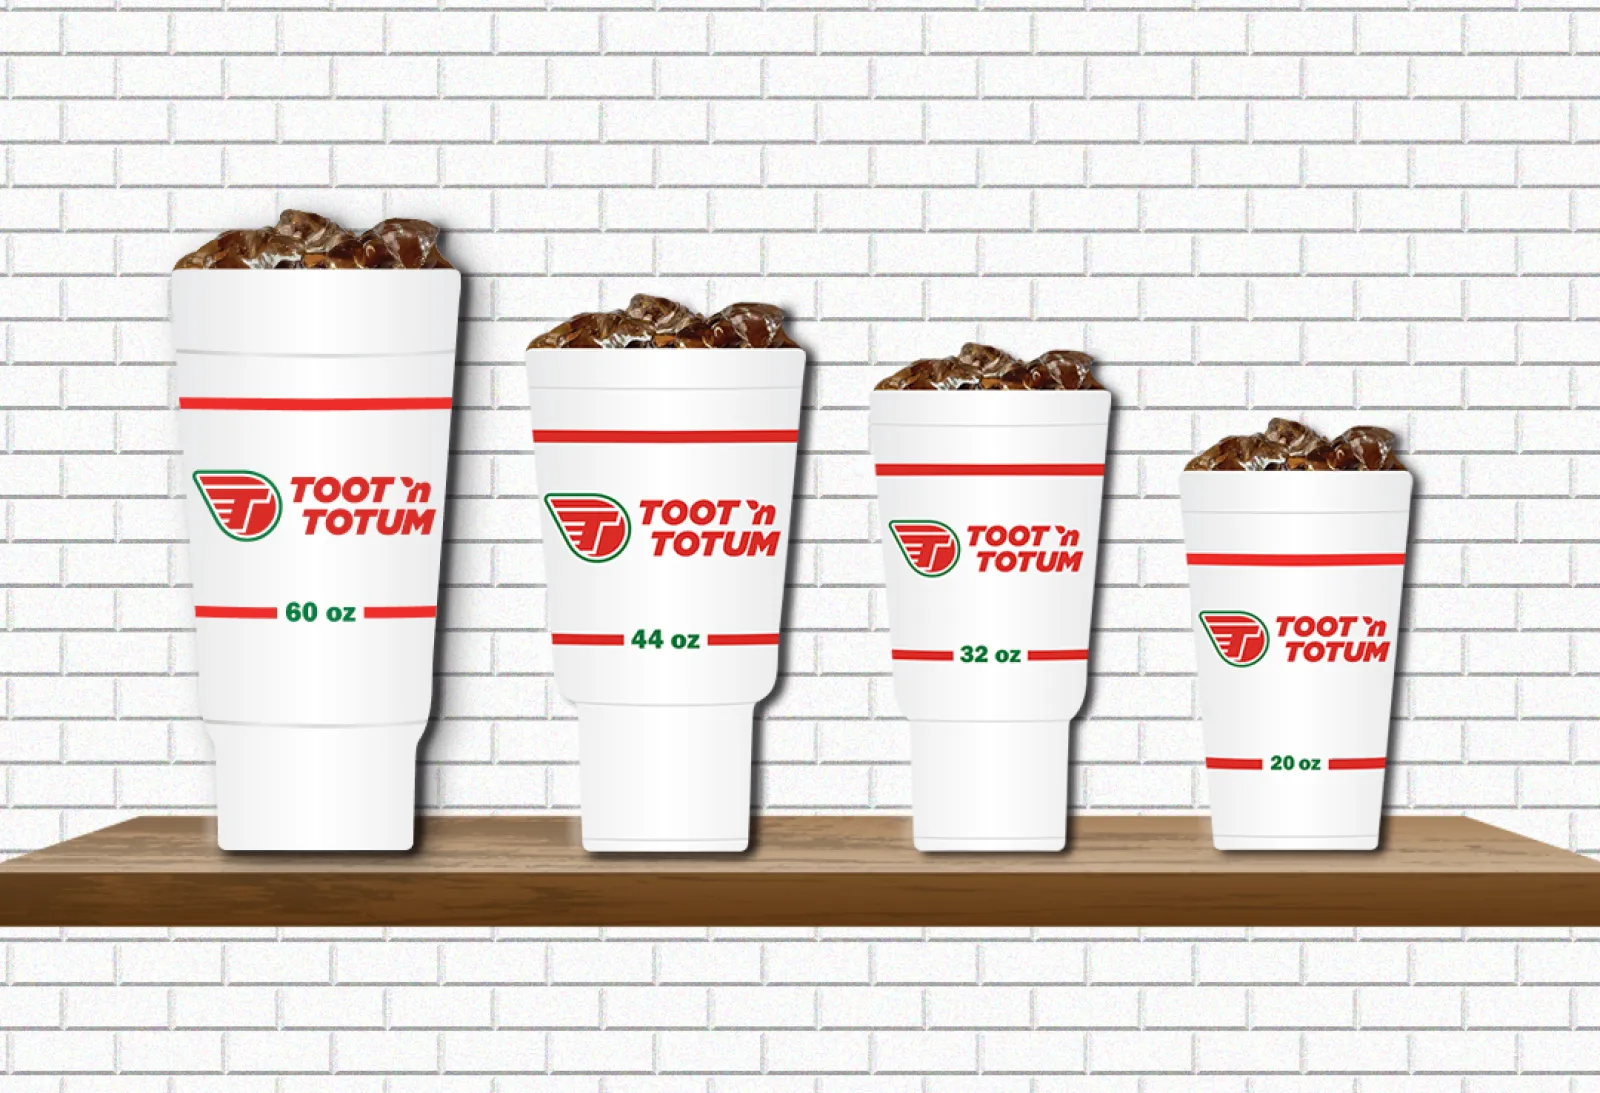 a row of white buckets with red text on them